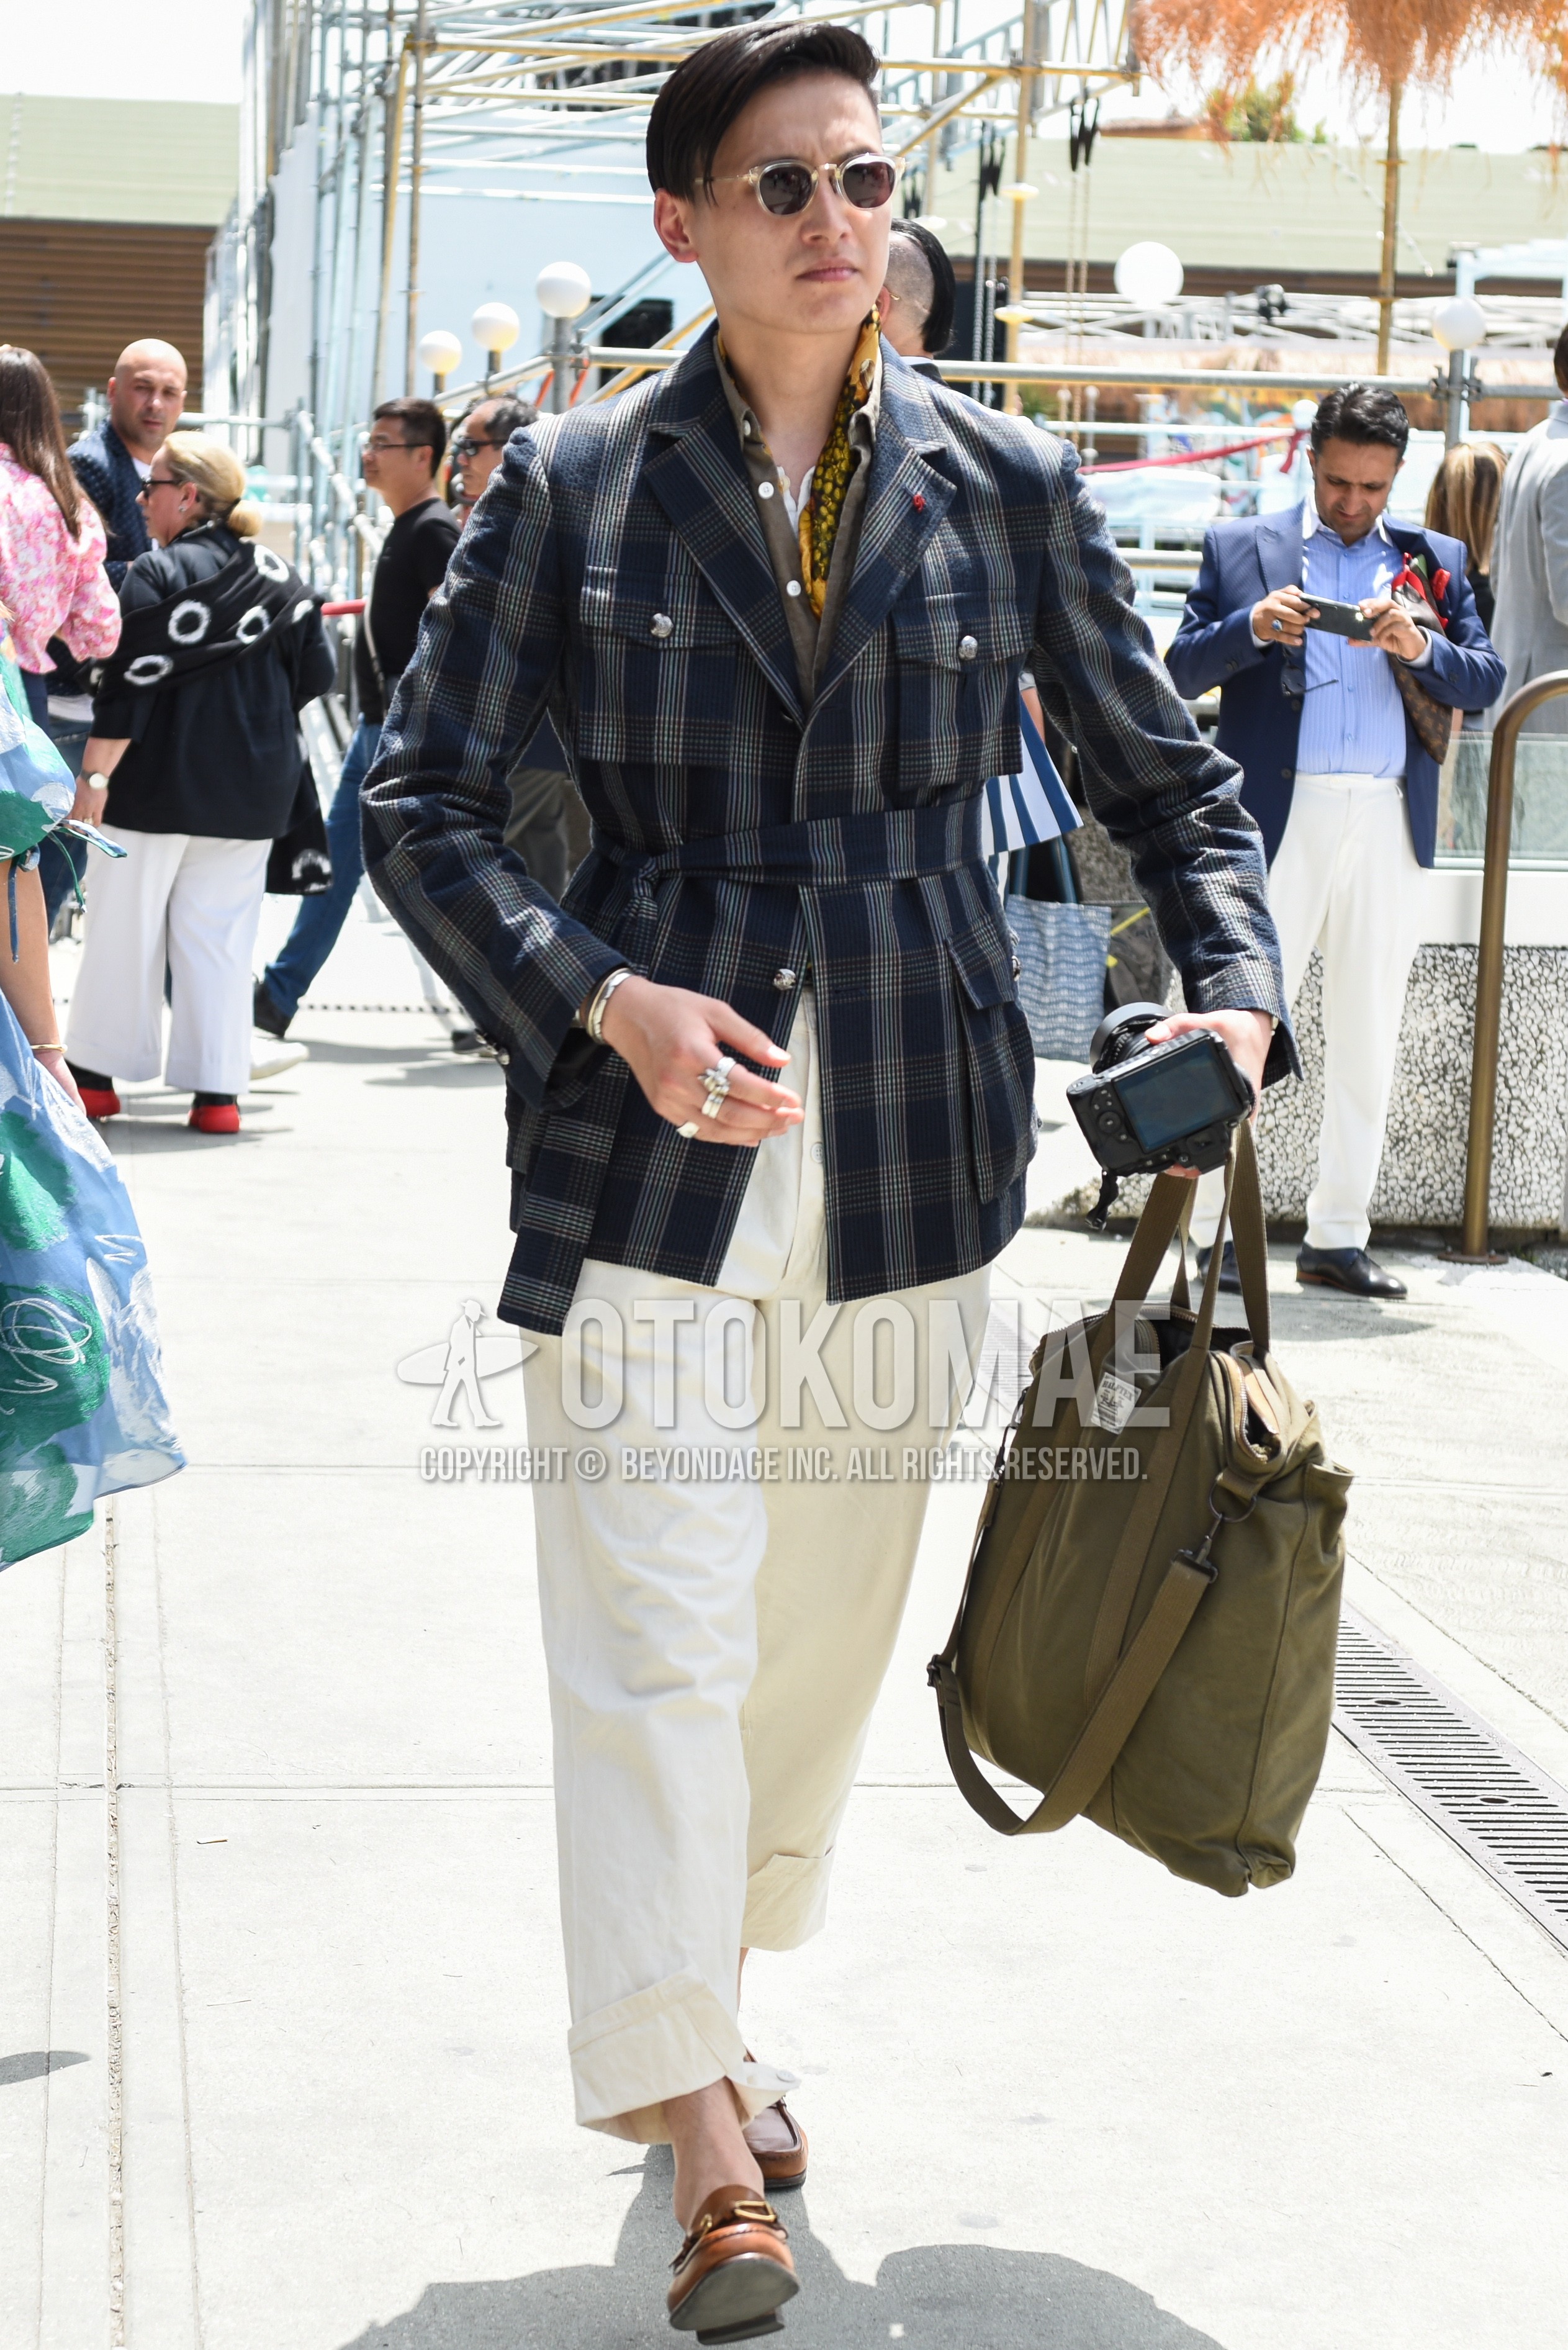 Men's spring autumn outfit with yellow scarf bandana/neckerchief, navy gray check safari jacket, white plain cotton pants, brown bit loafers leather shoes, olive green plain briefcase/handbag.